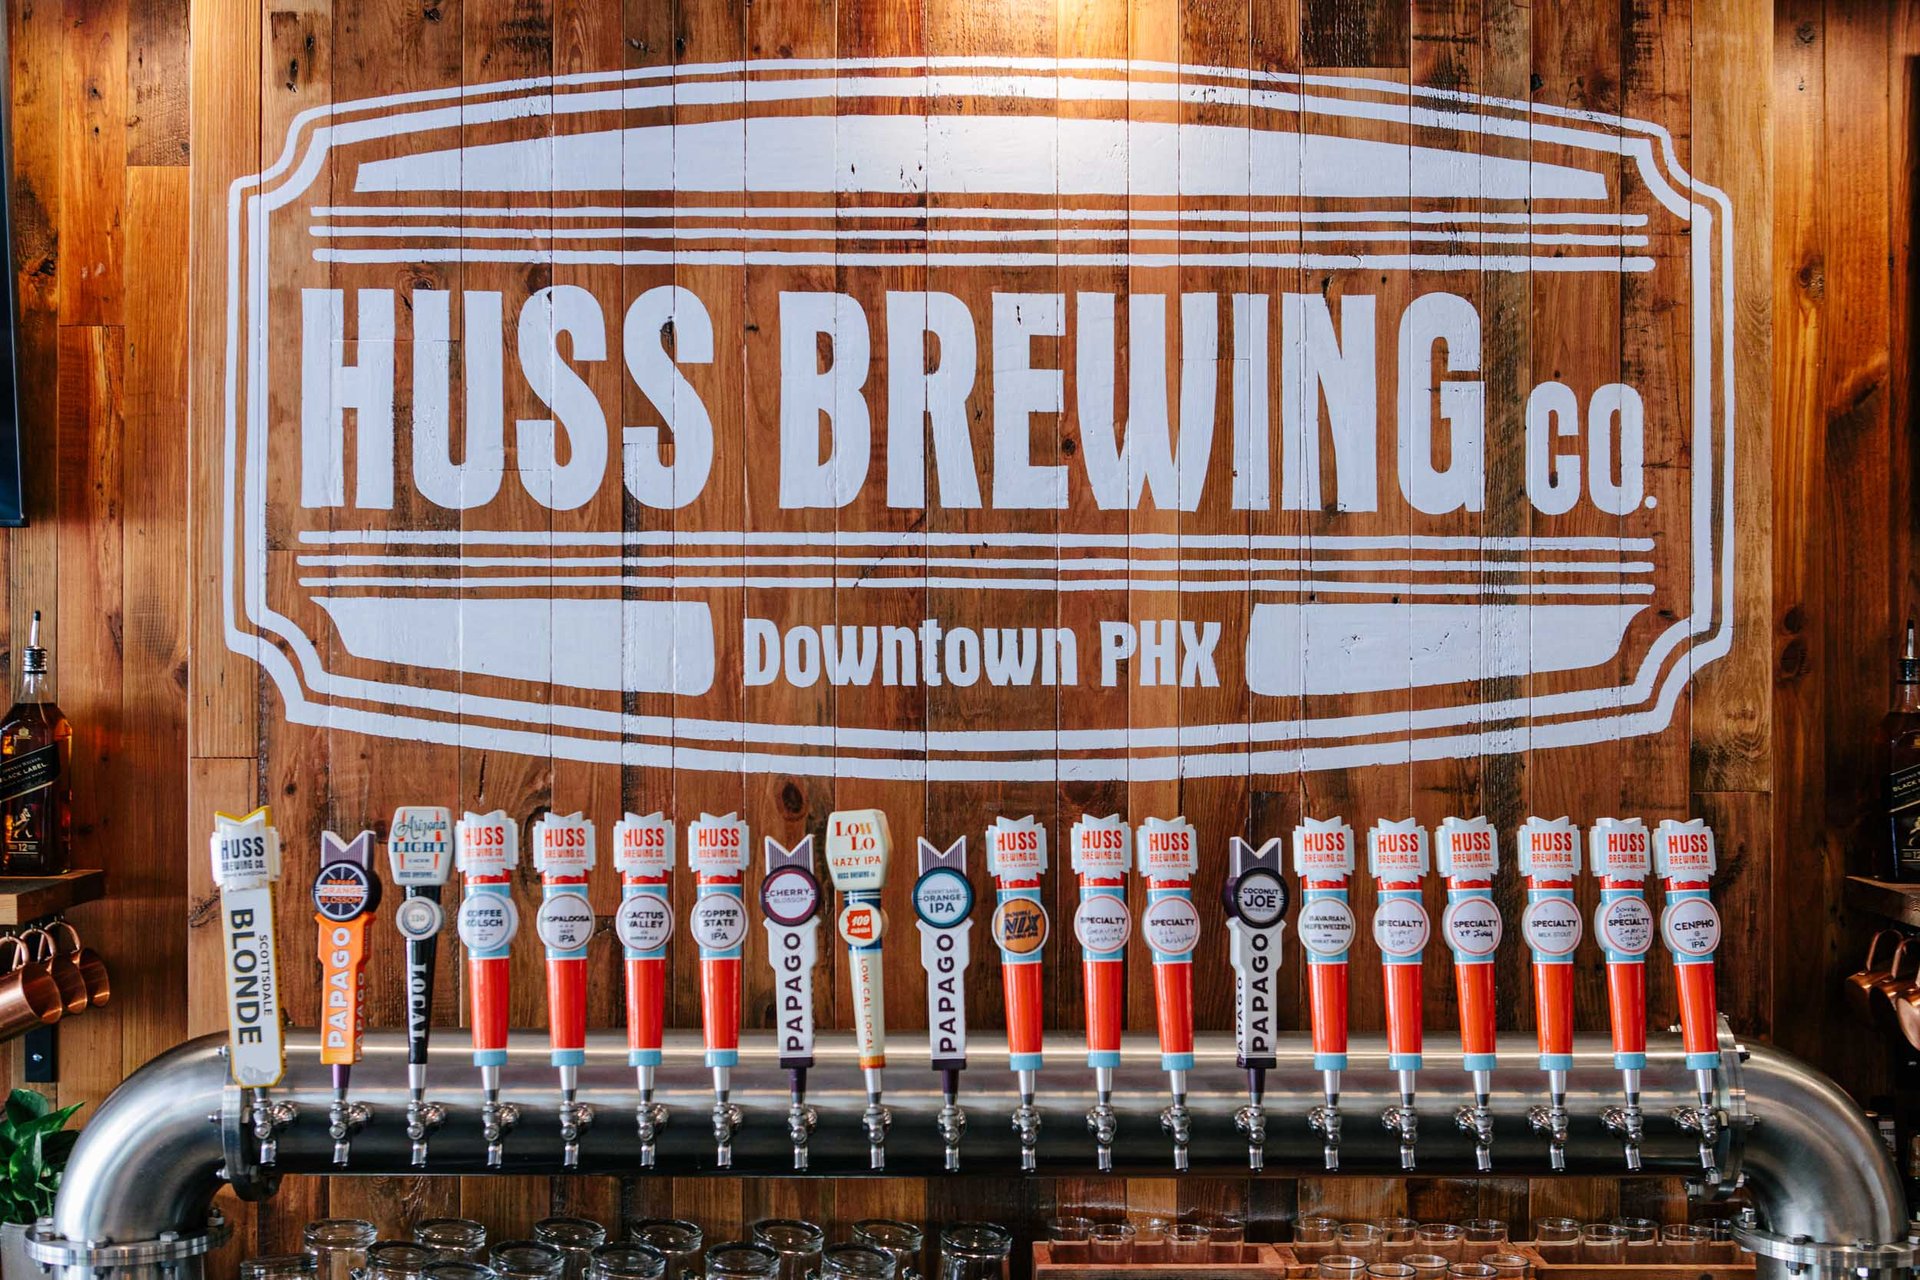 Country music station KNIX honored with new Huss Brewing Co. cans